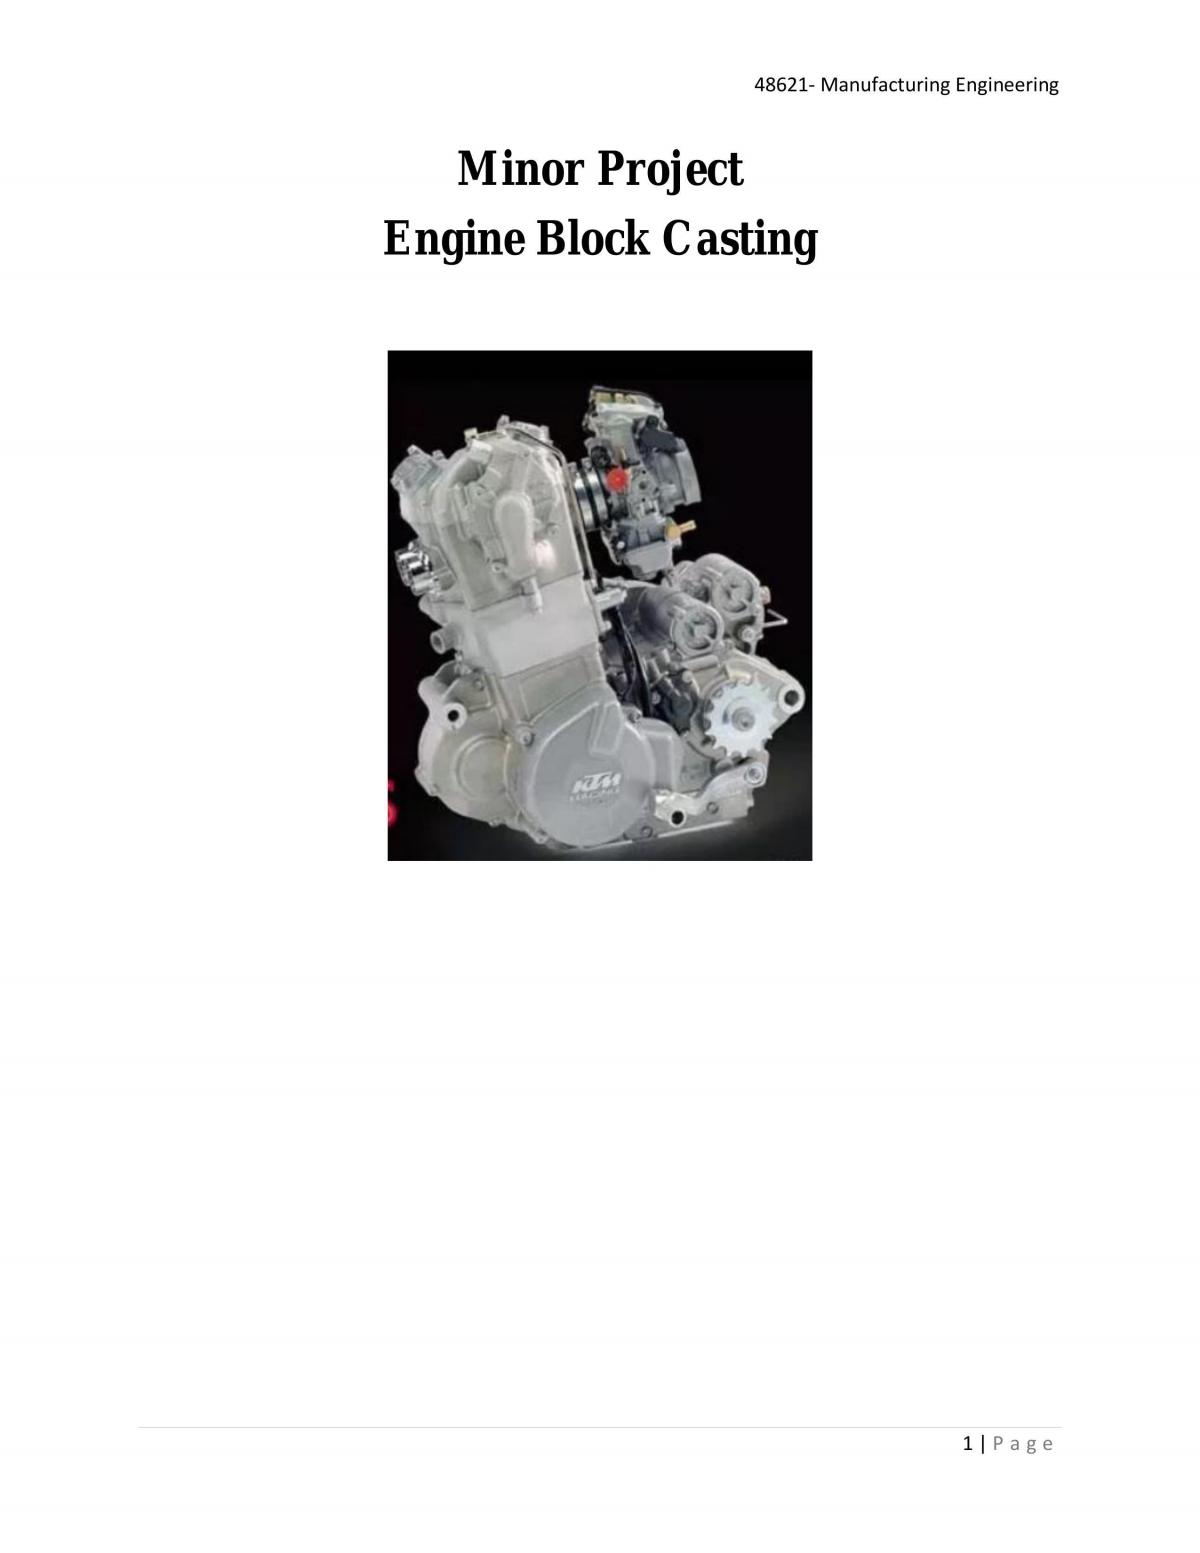 Engine Block Casting Report - Page 1